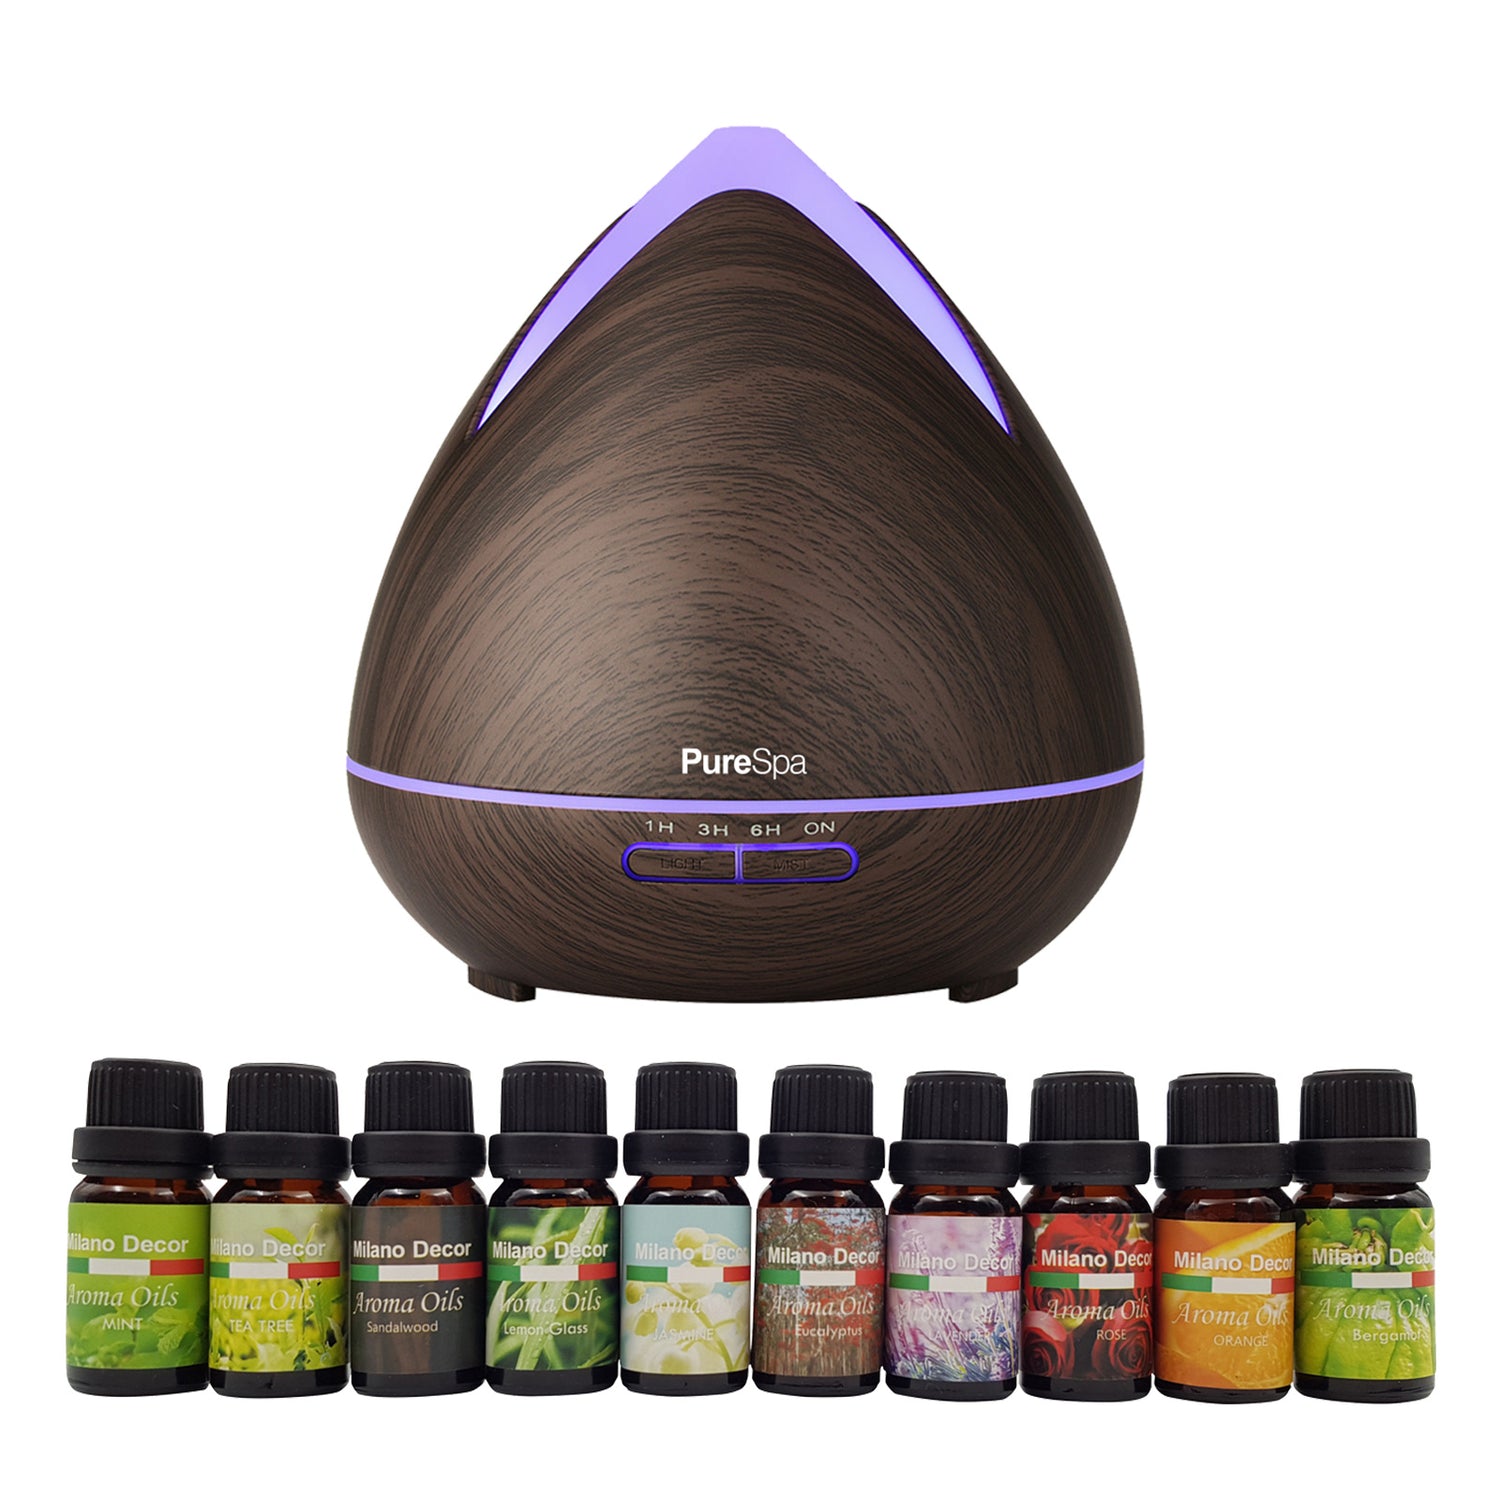 Purespa Diffuser Set With 10 Pack Diffuser Oils Humidifier Aromatherapy-Home Fragrances-PEROZ Accessories